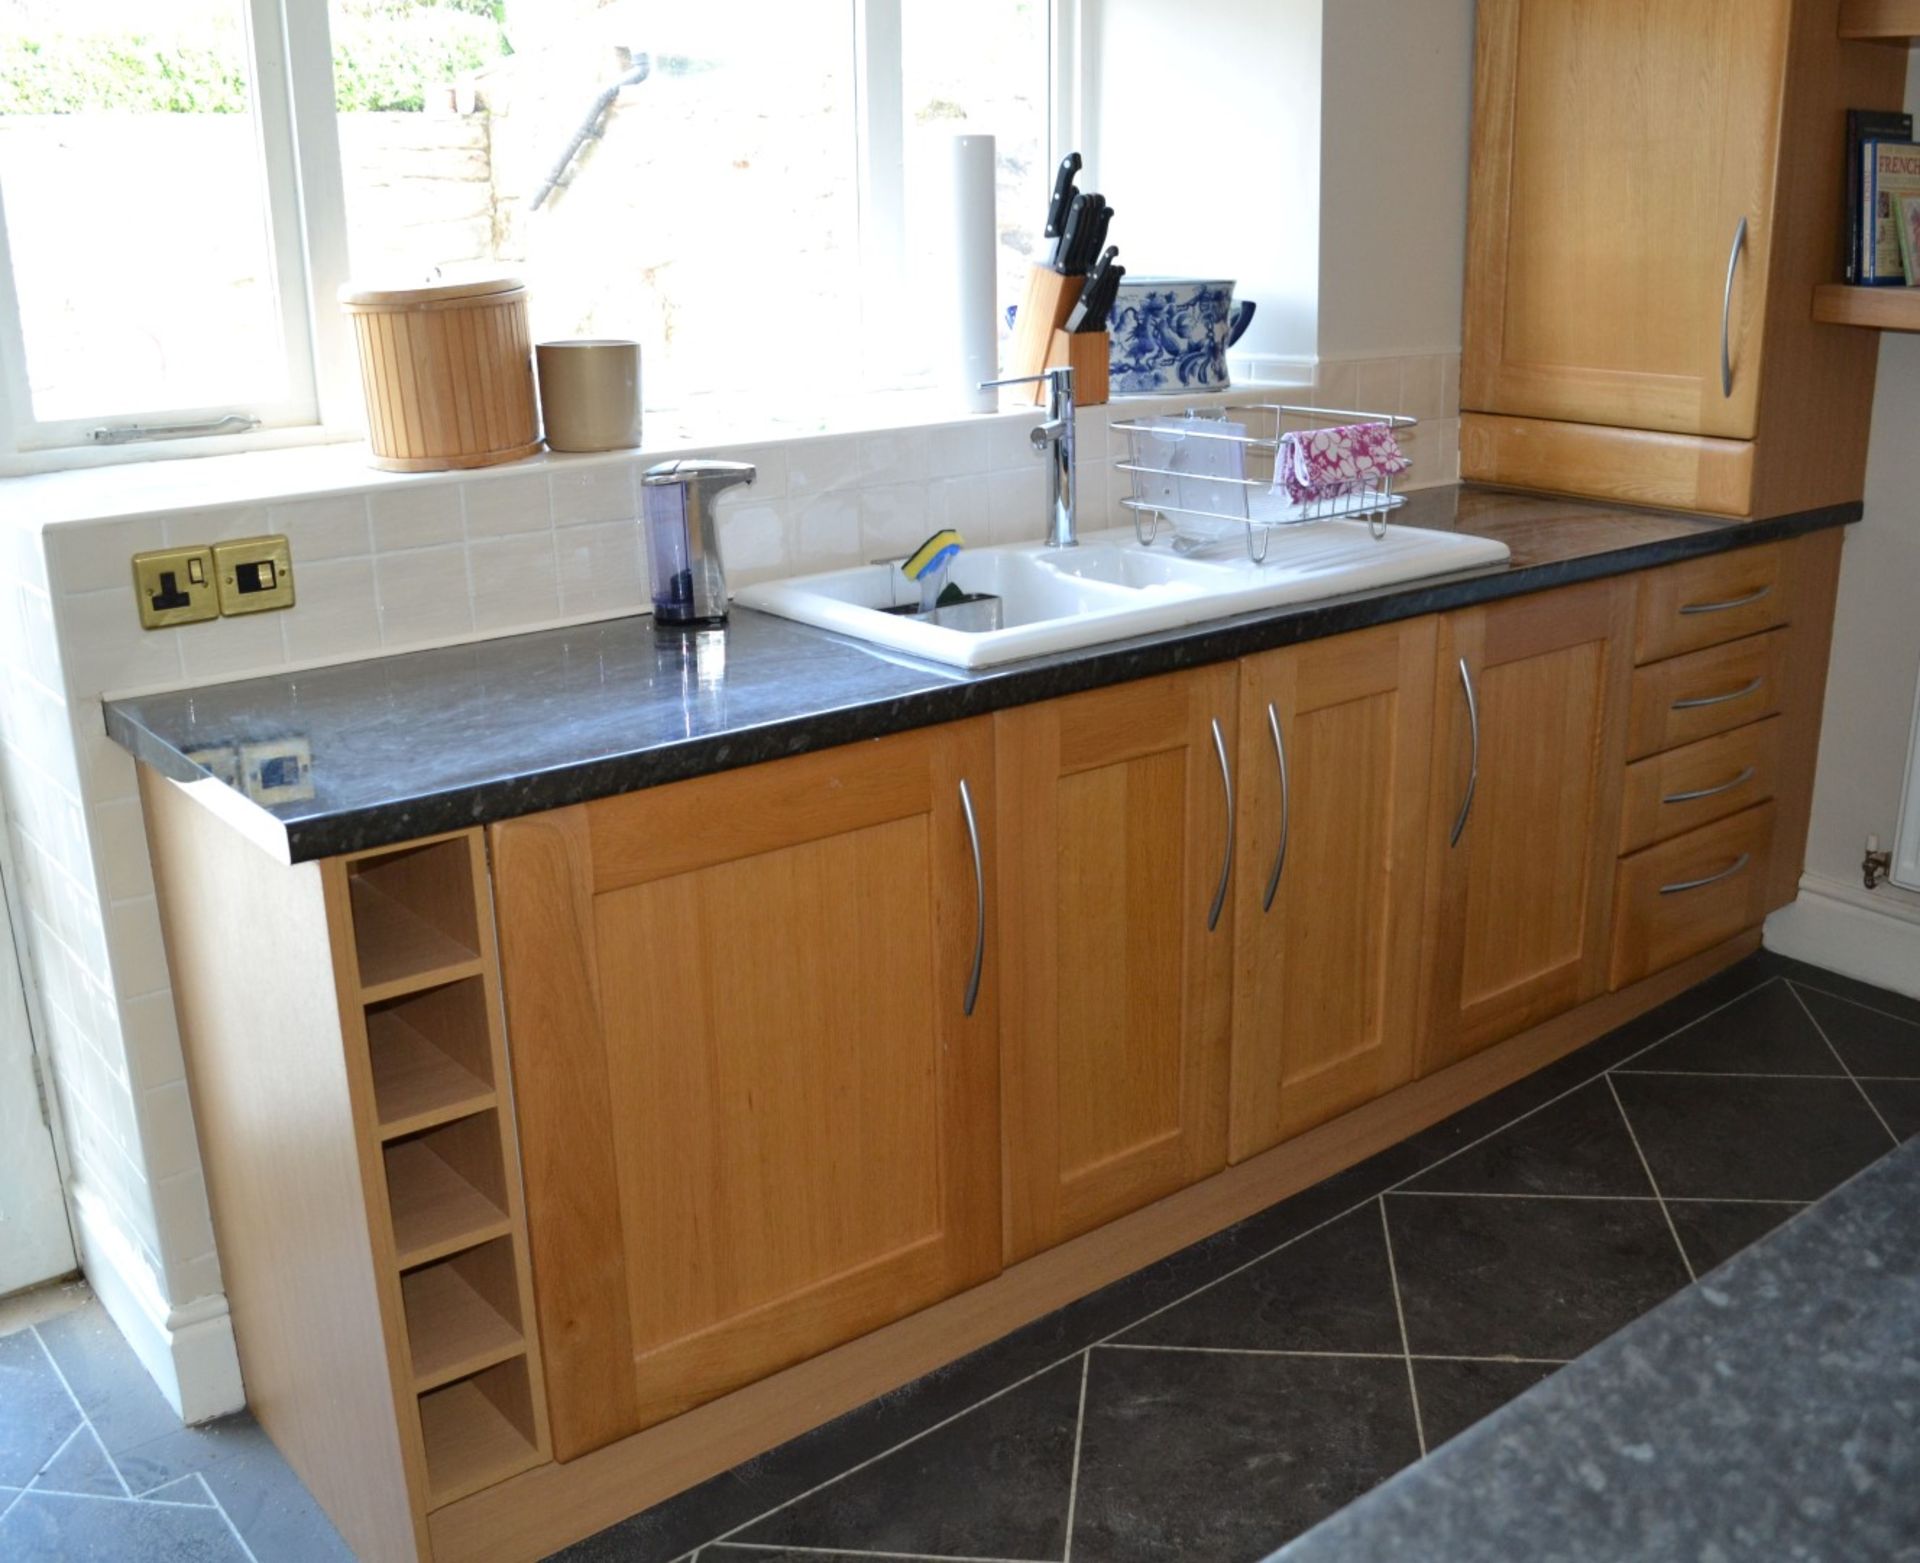 1 x Compact Fitted Kitchen With Neff and Tecnik Appliances - CL322 - Location: Pleasington, BB2 - * - Image 3 of 35